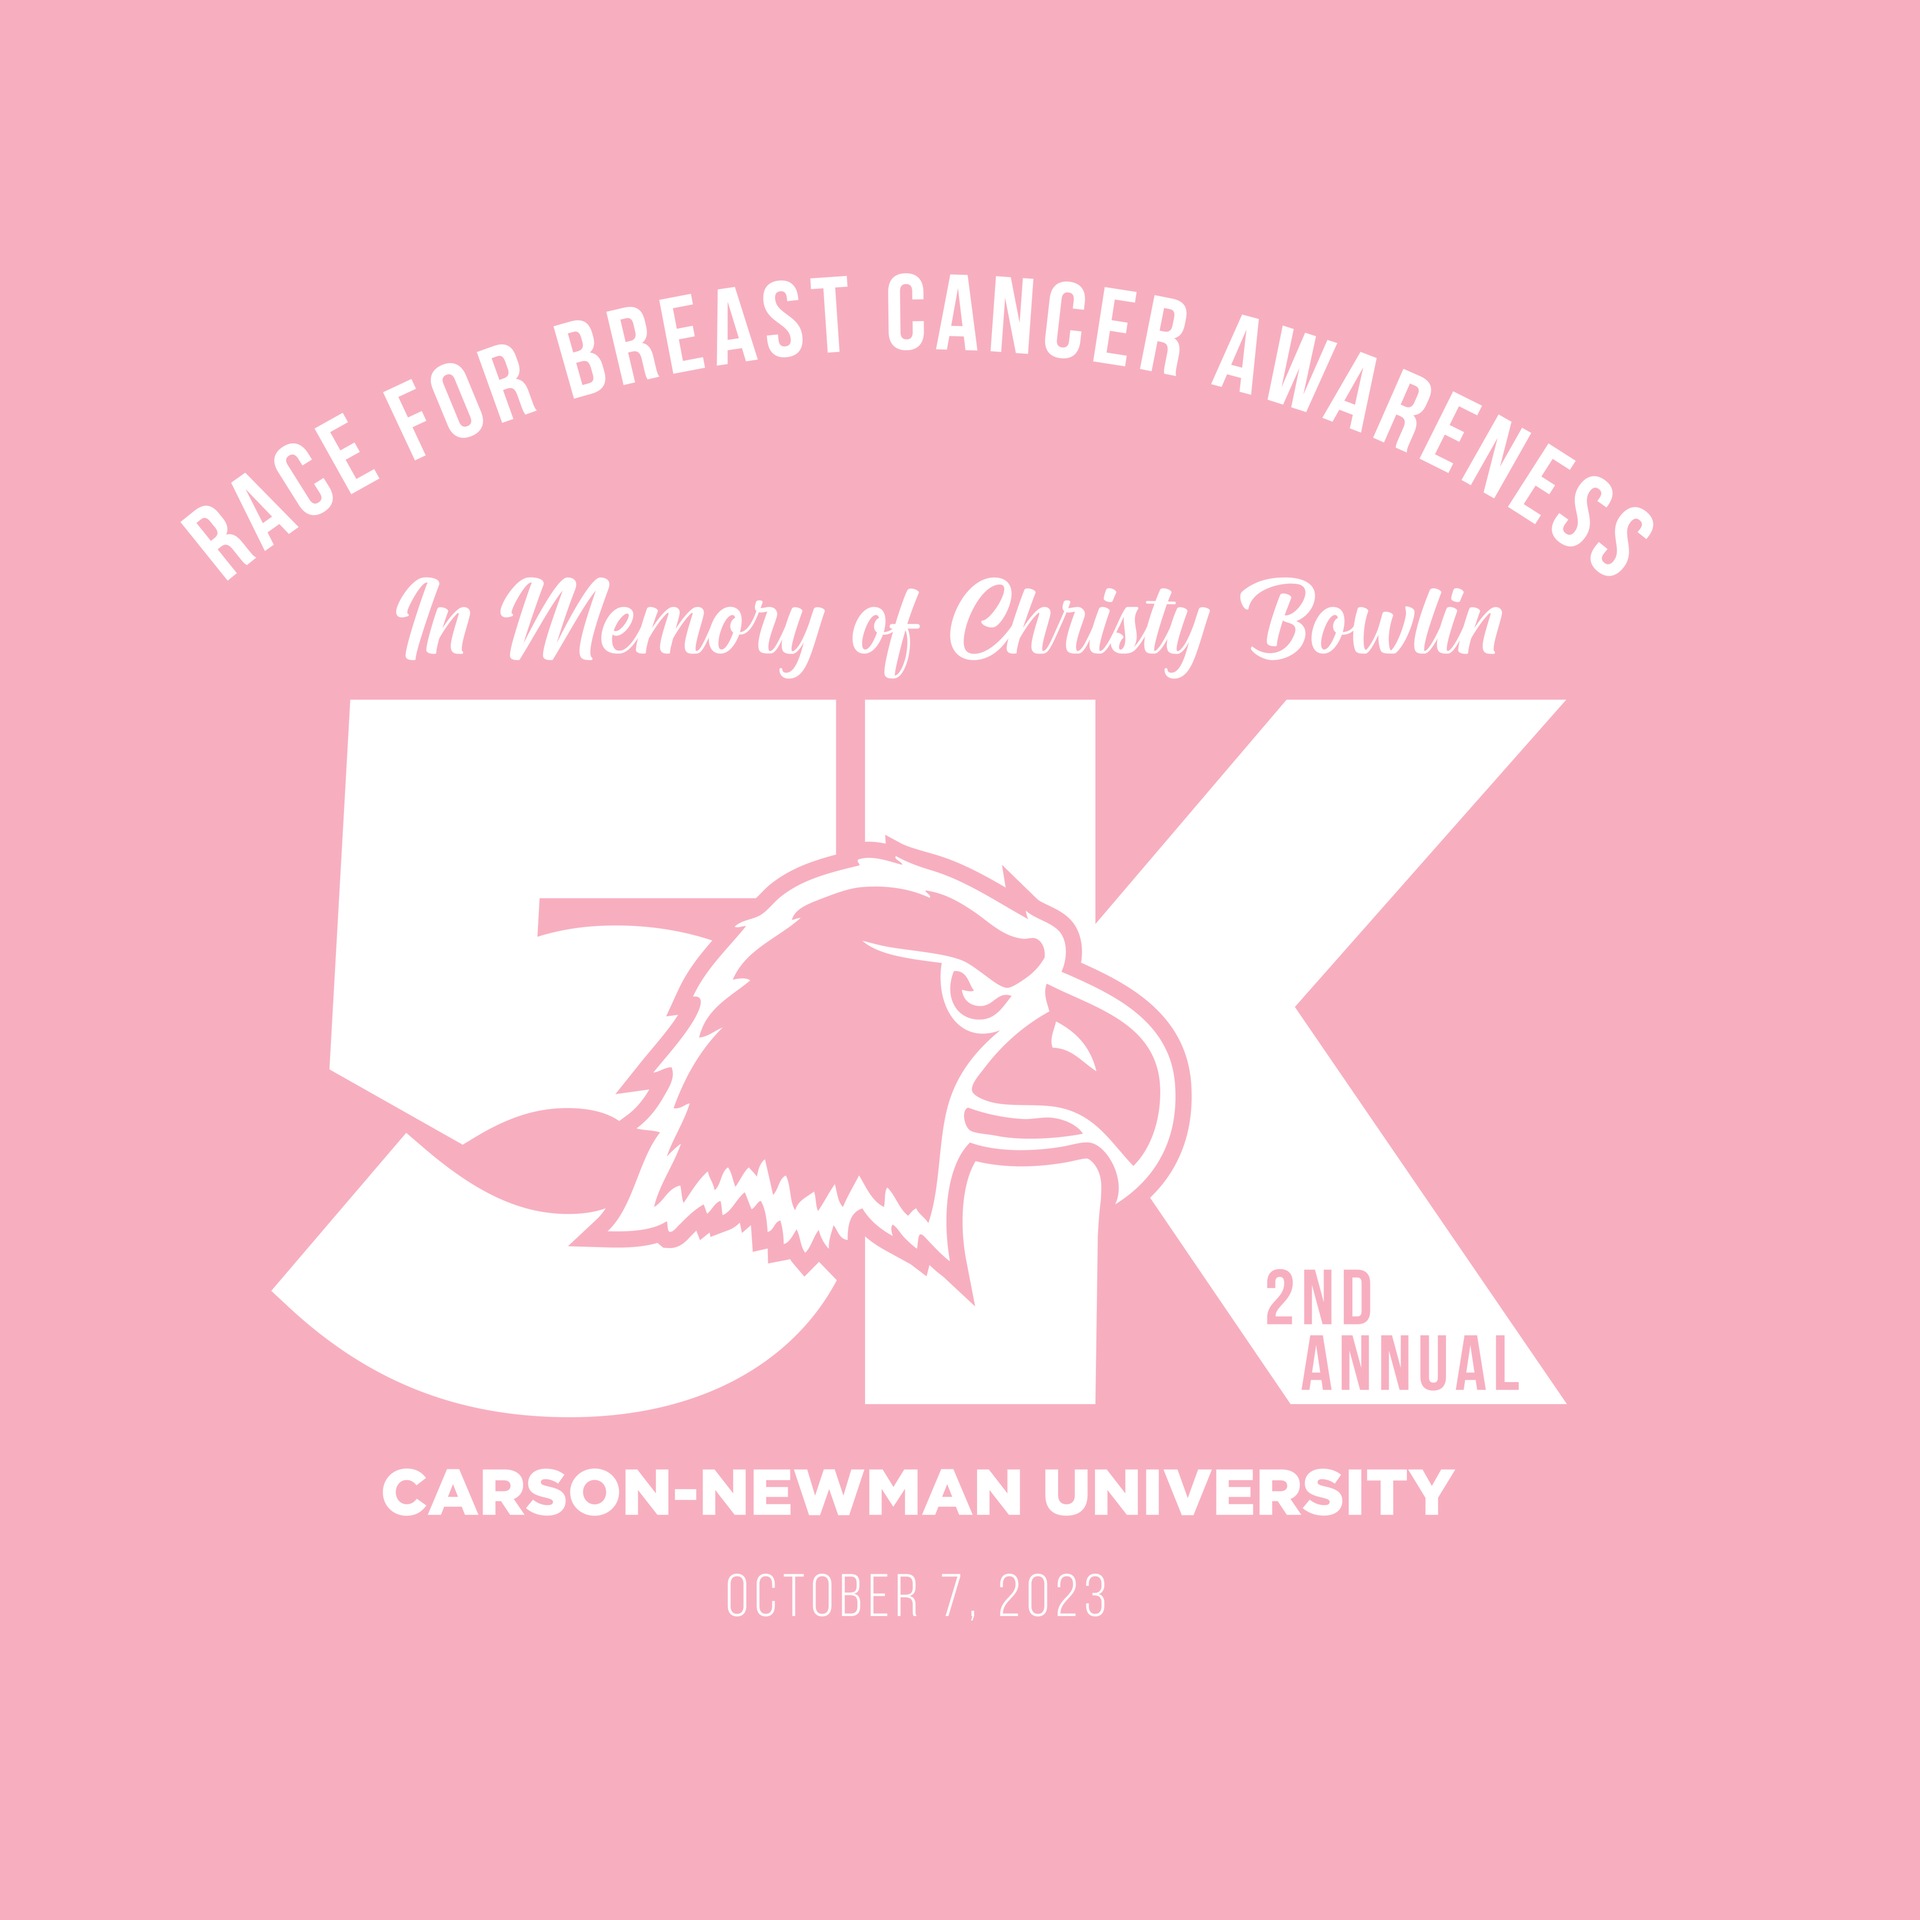 C-N to play host to second annual Race For Breast Cancer Awareness prior to Tusculum football game